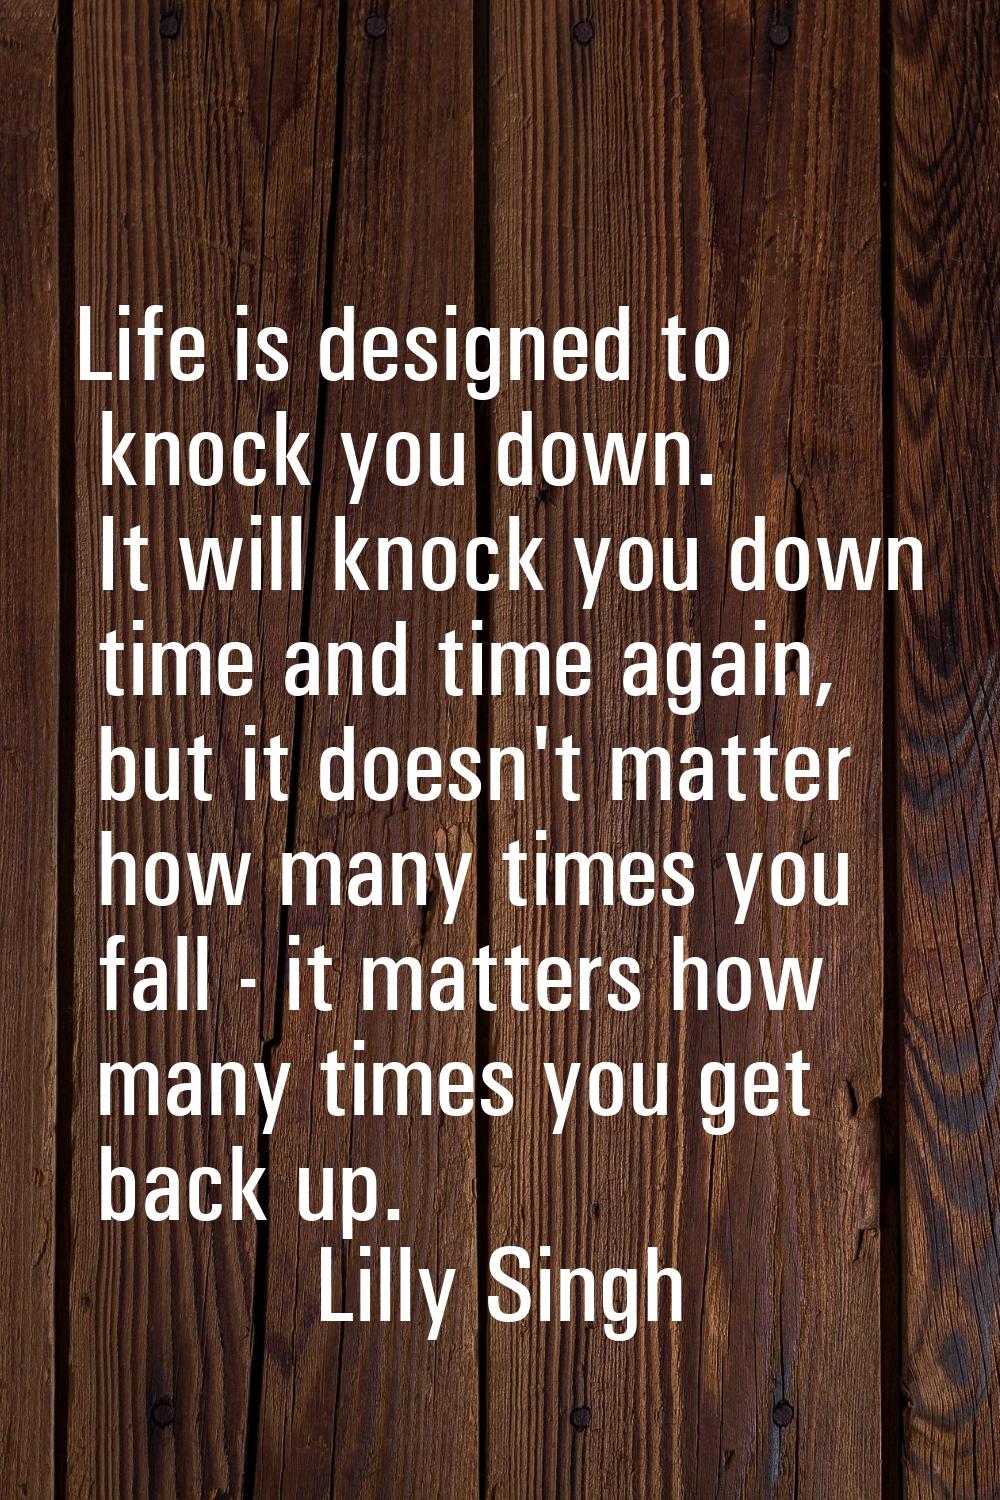 Life is designed to knock you down. It will knock you down time and time again, but it doesn't matt